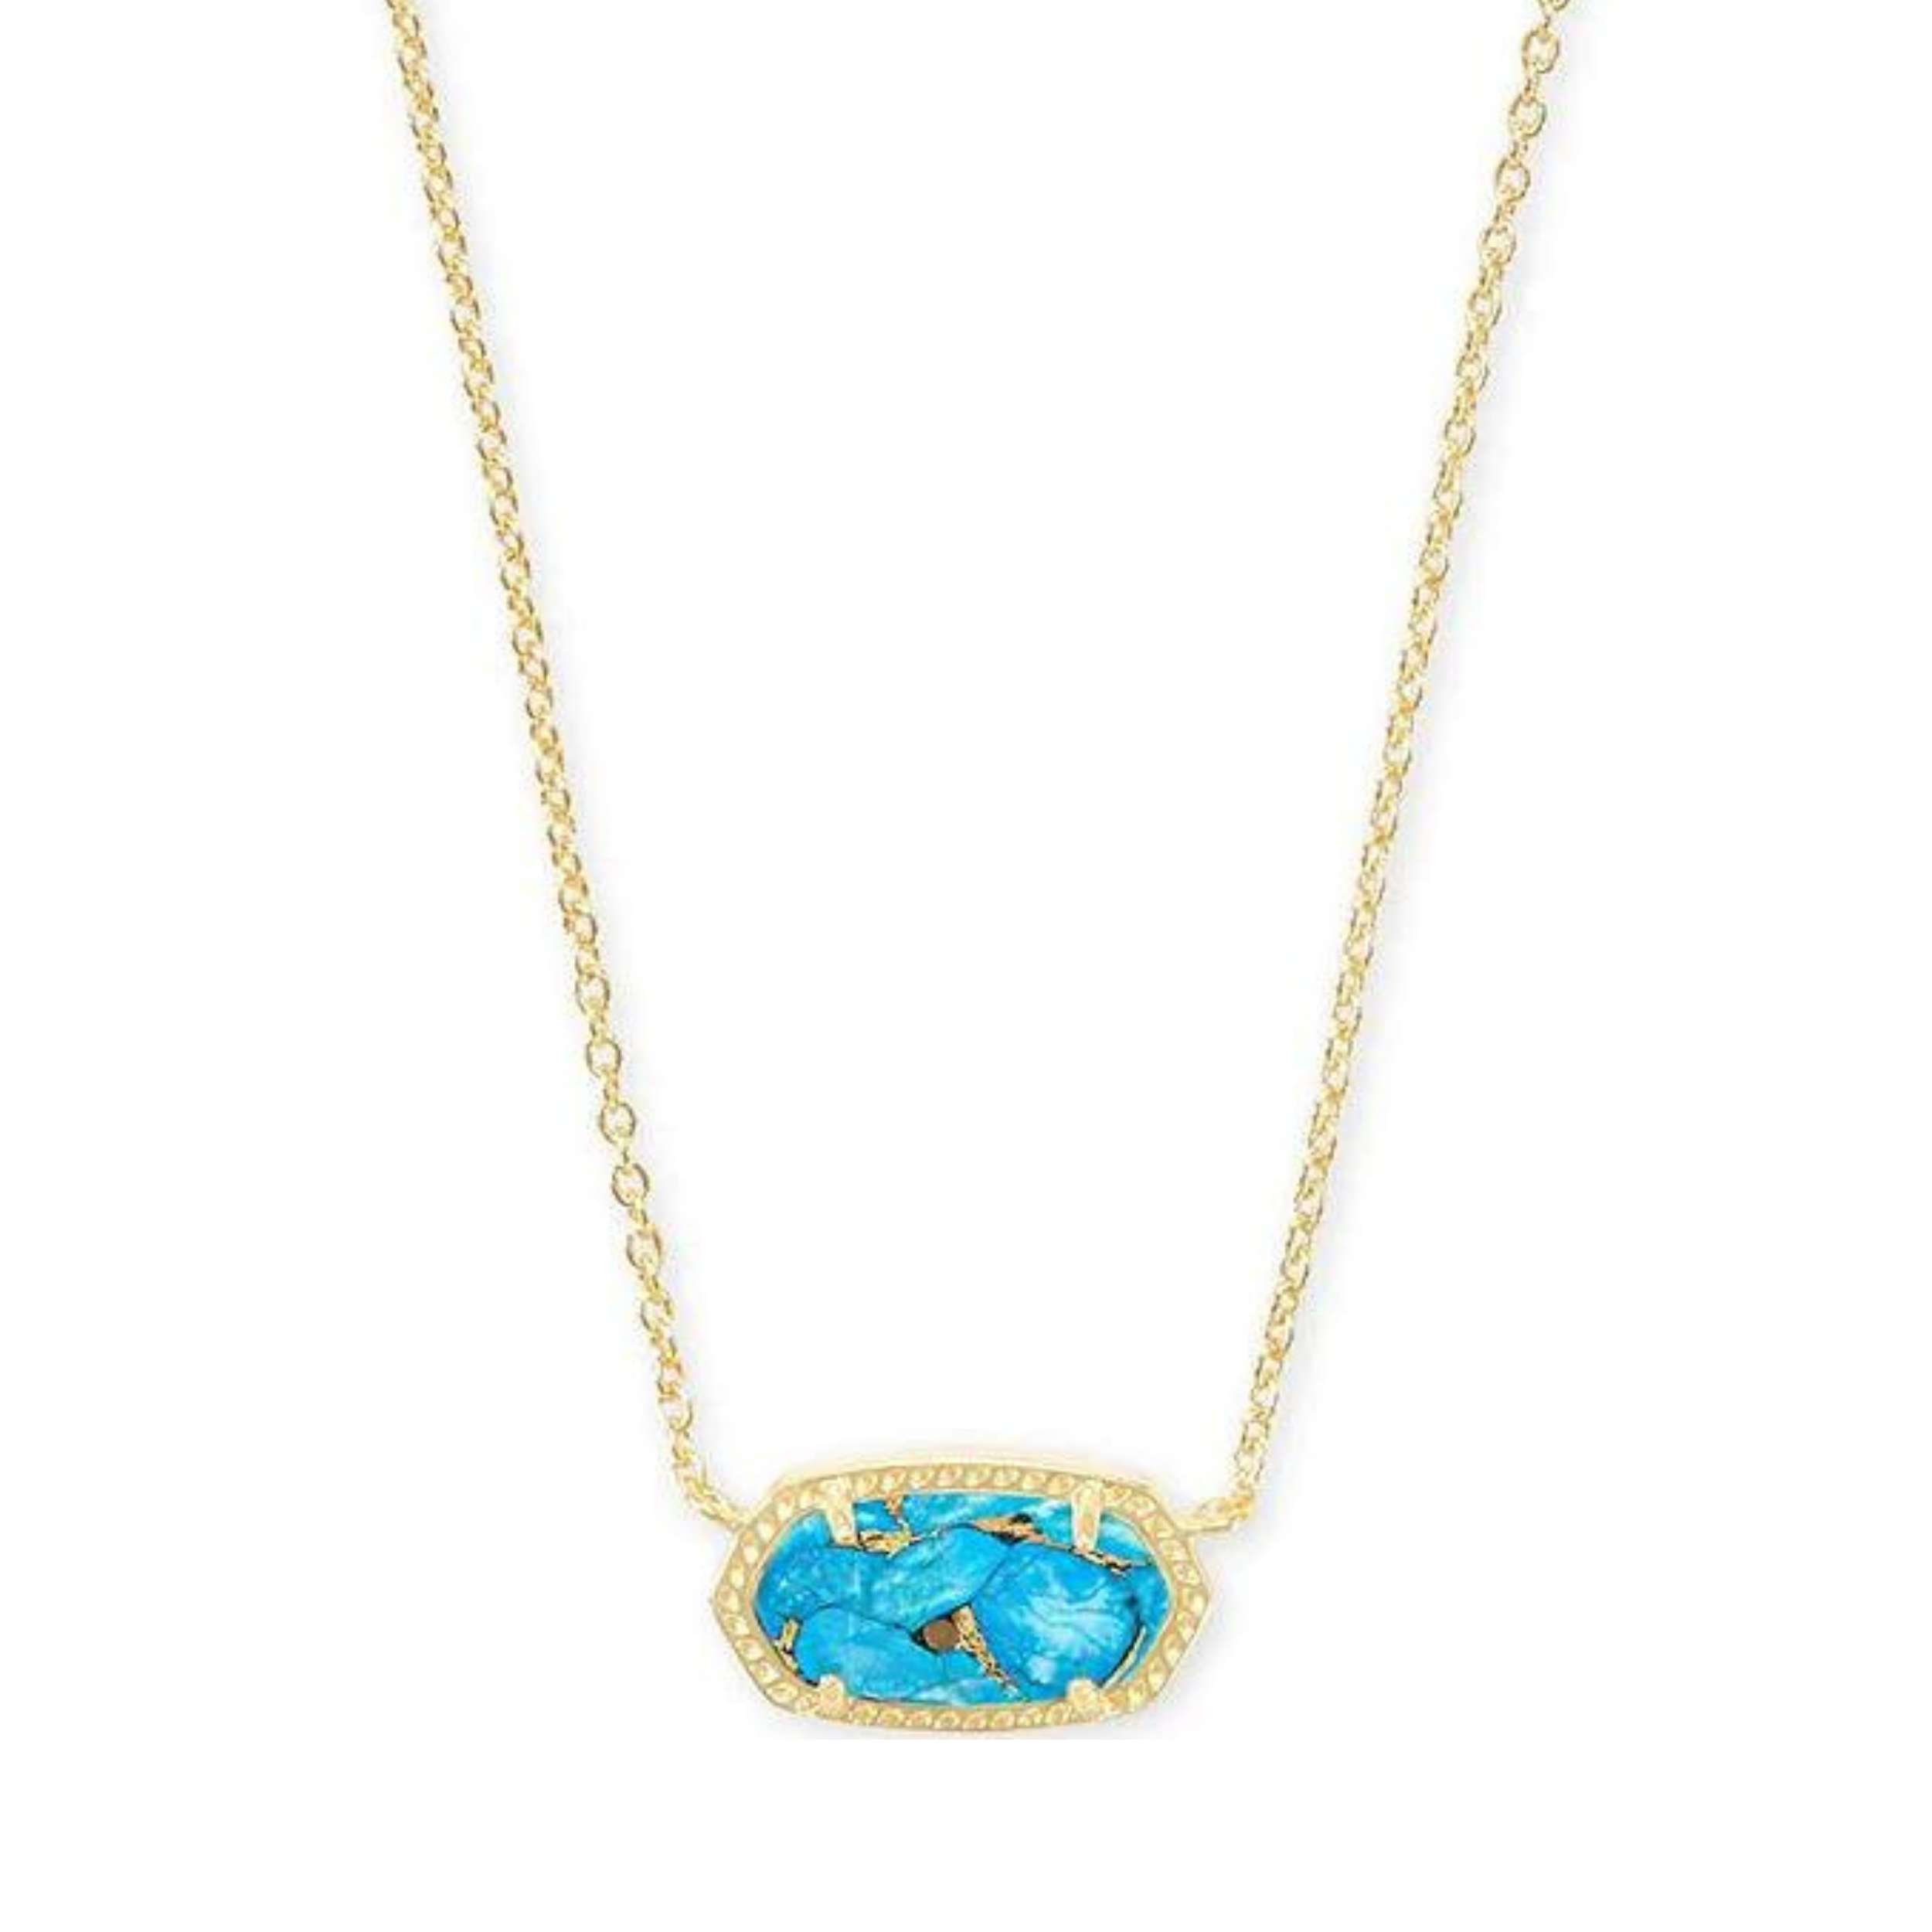 Gold necklace with gold bronze veined turquoise stone, pictured on a white background.